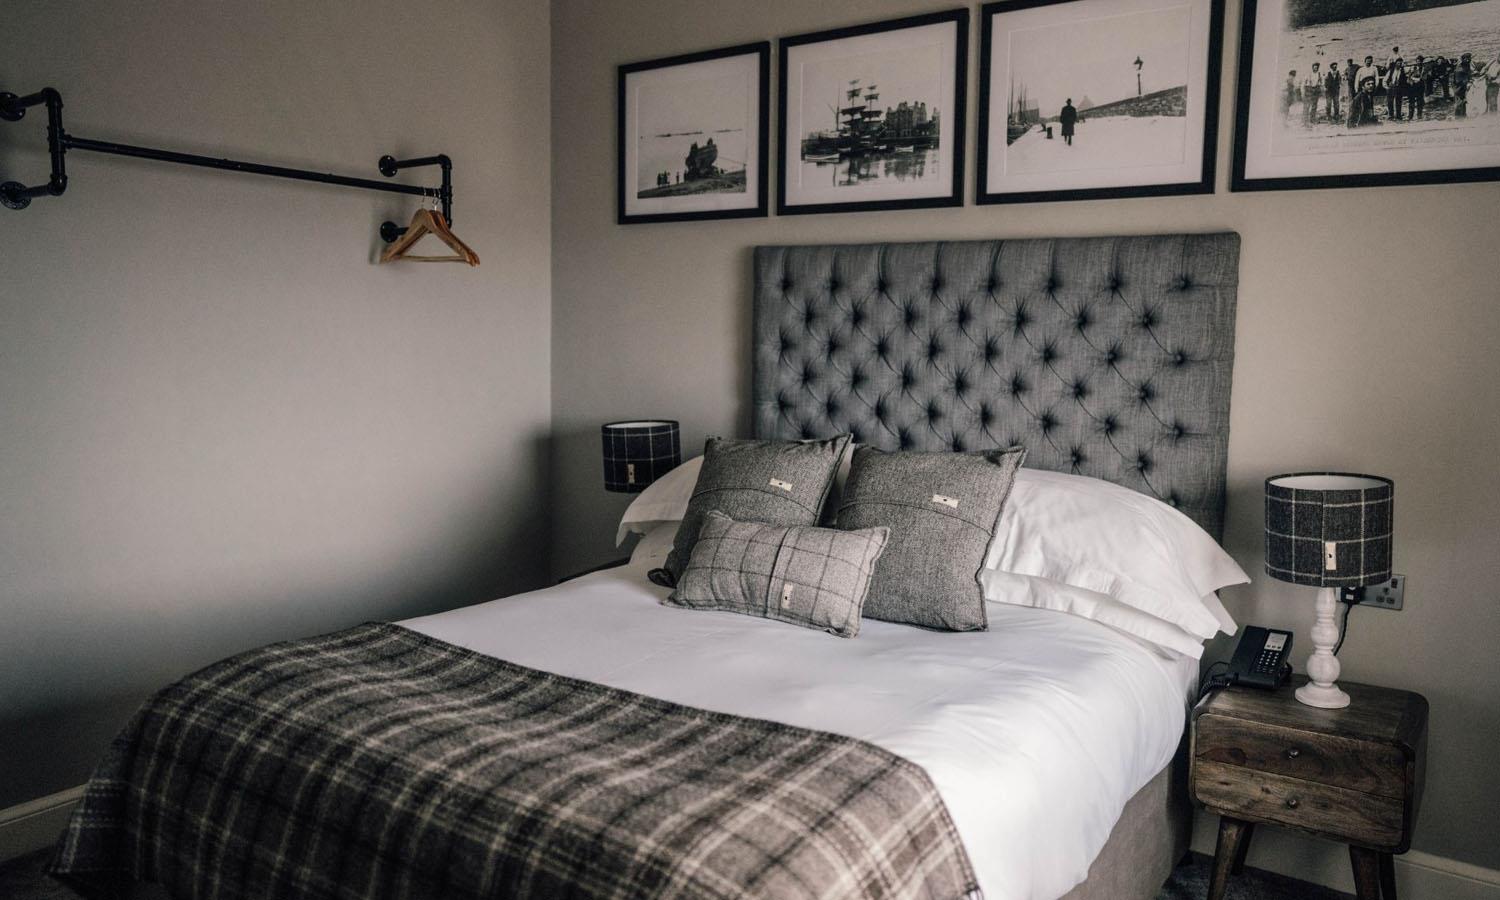 Snuggle down in one of our Double Rooms